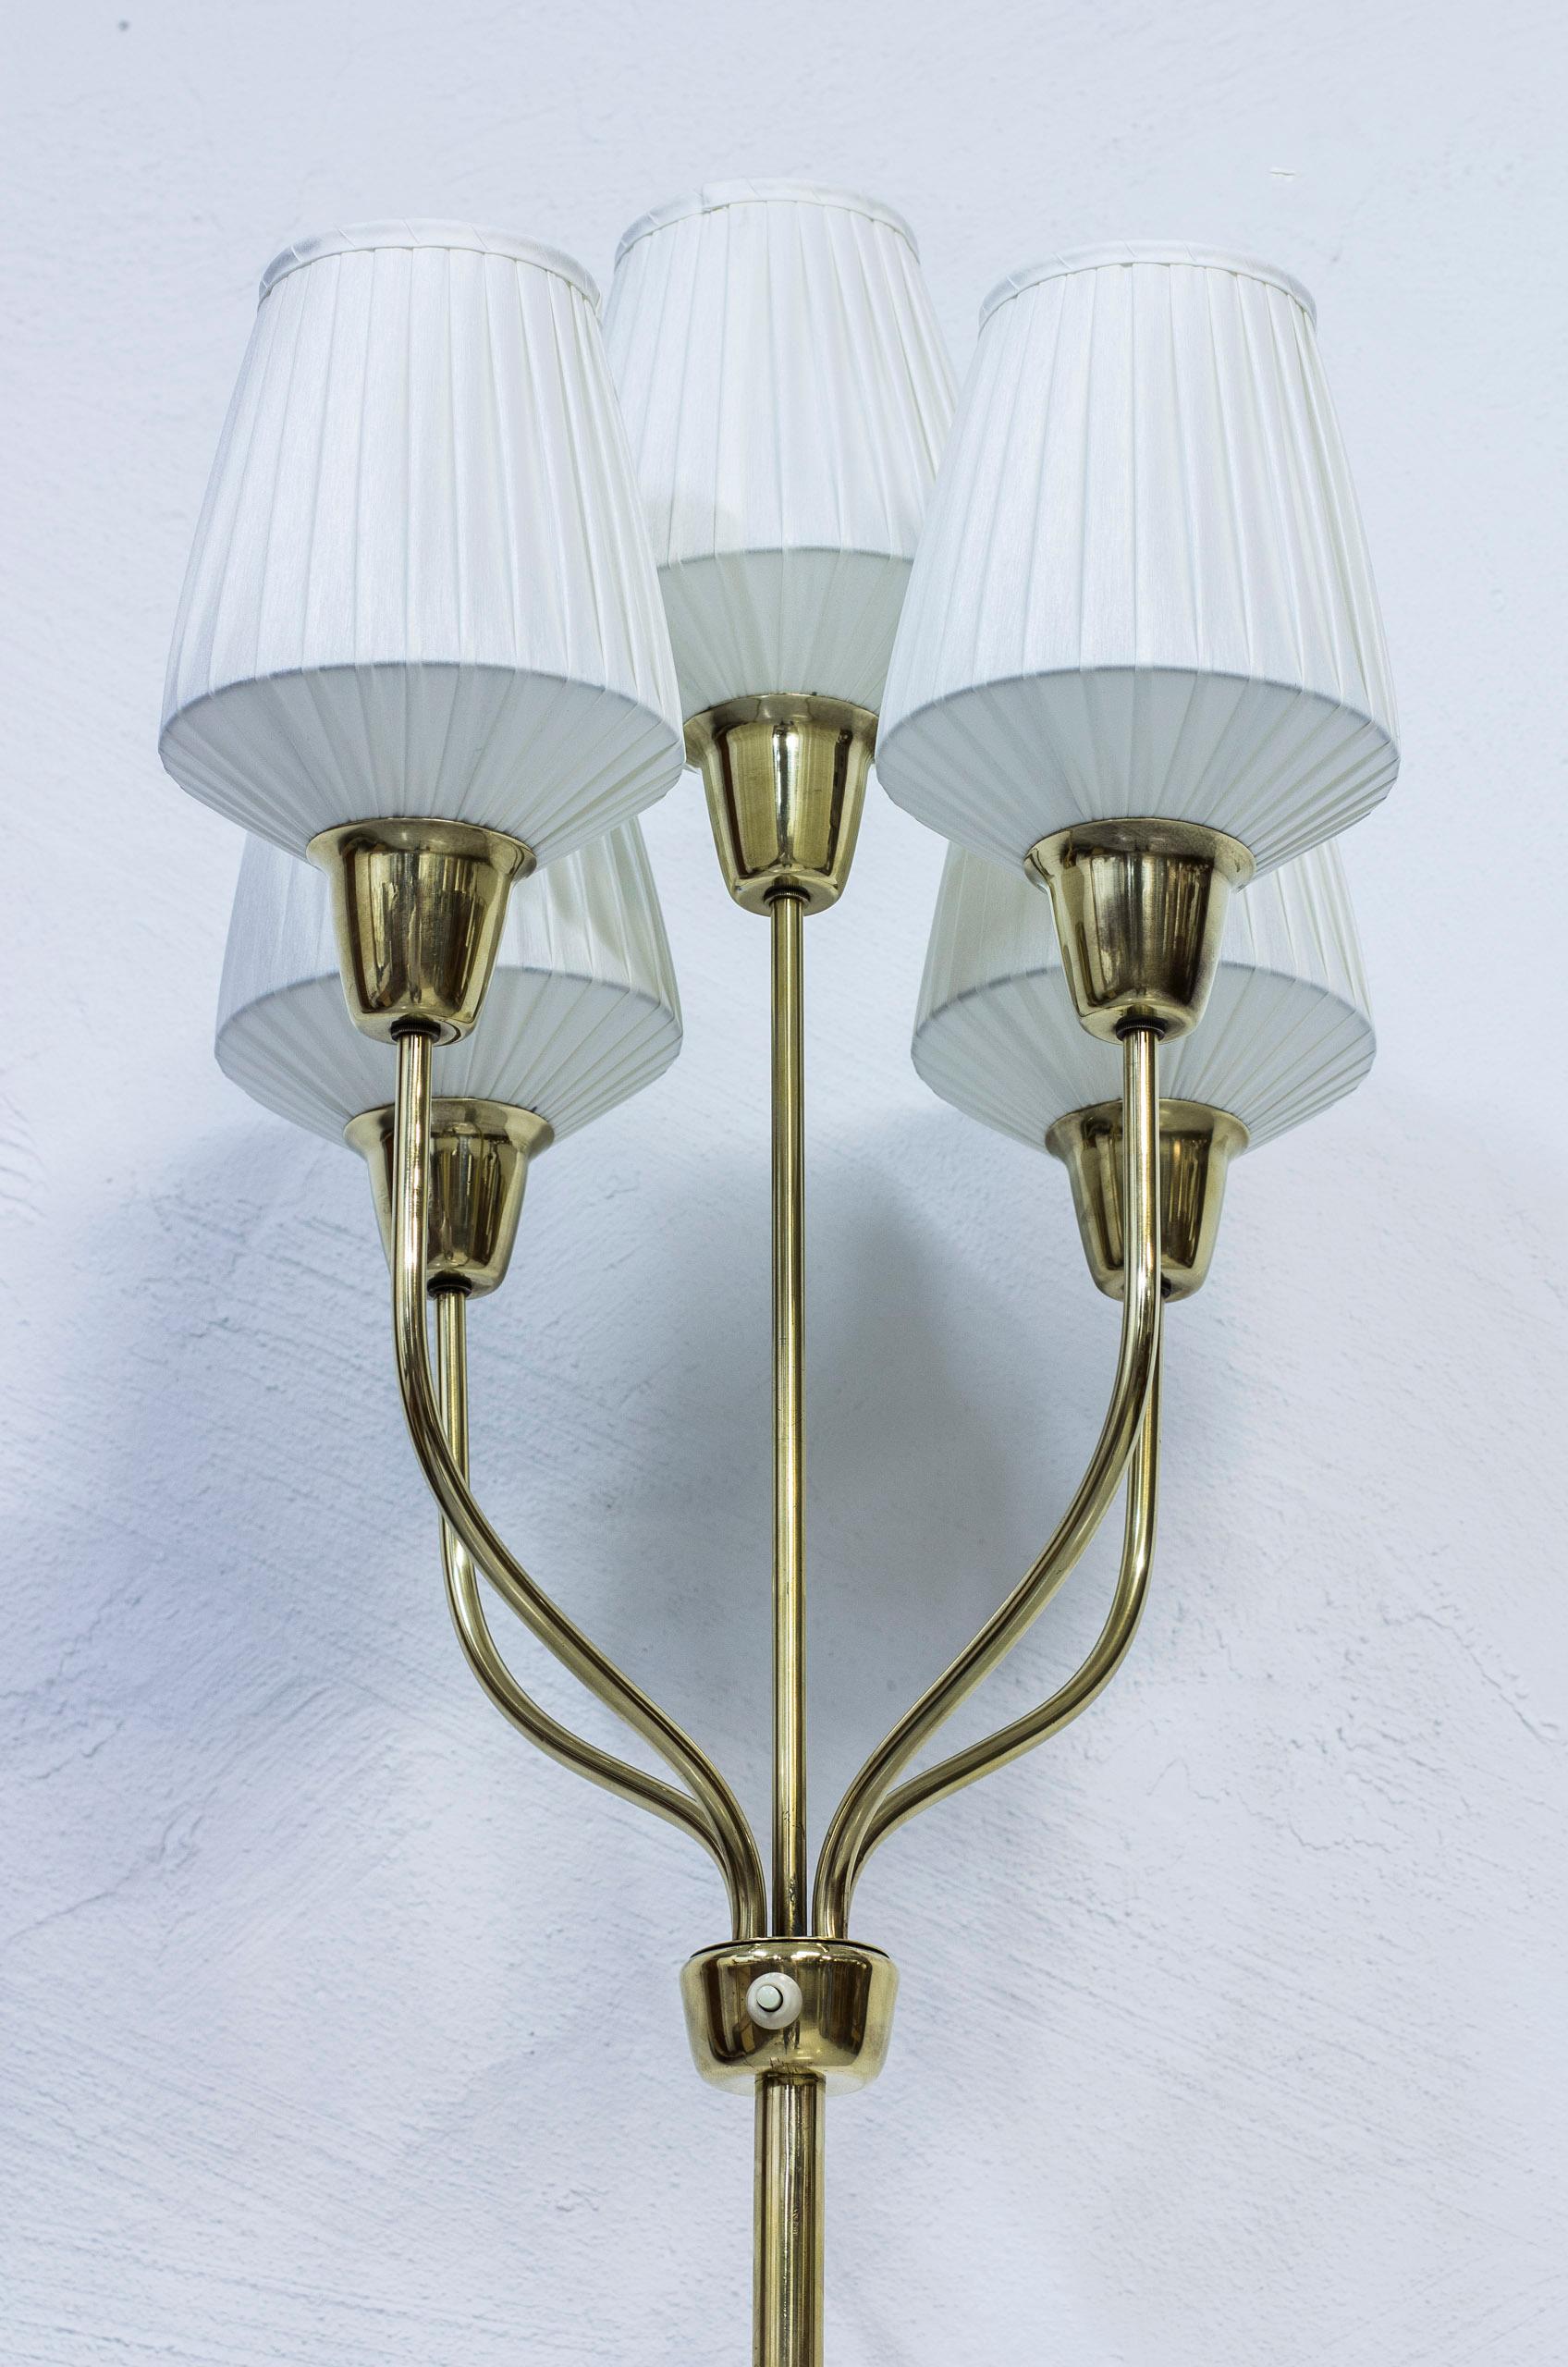 Rare floor lamp designed by Hans Bergström. Produced by his company Ateljé Lyktan in Åhus, Sweden, during the 1940s. Consisting of five organically shaped armes made from solid brass with original lamp shades that have been reupholstered with new